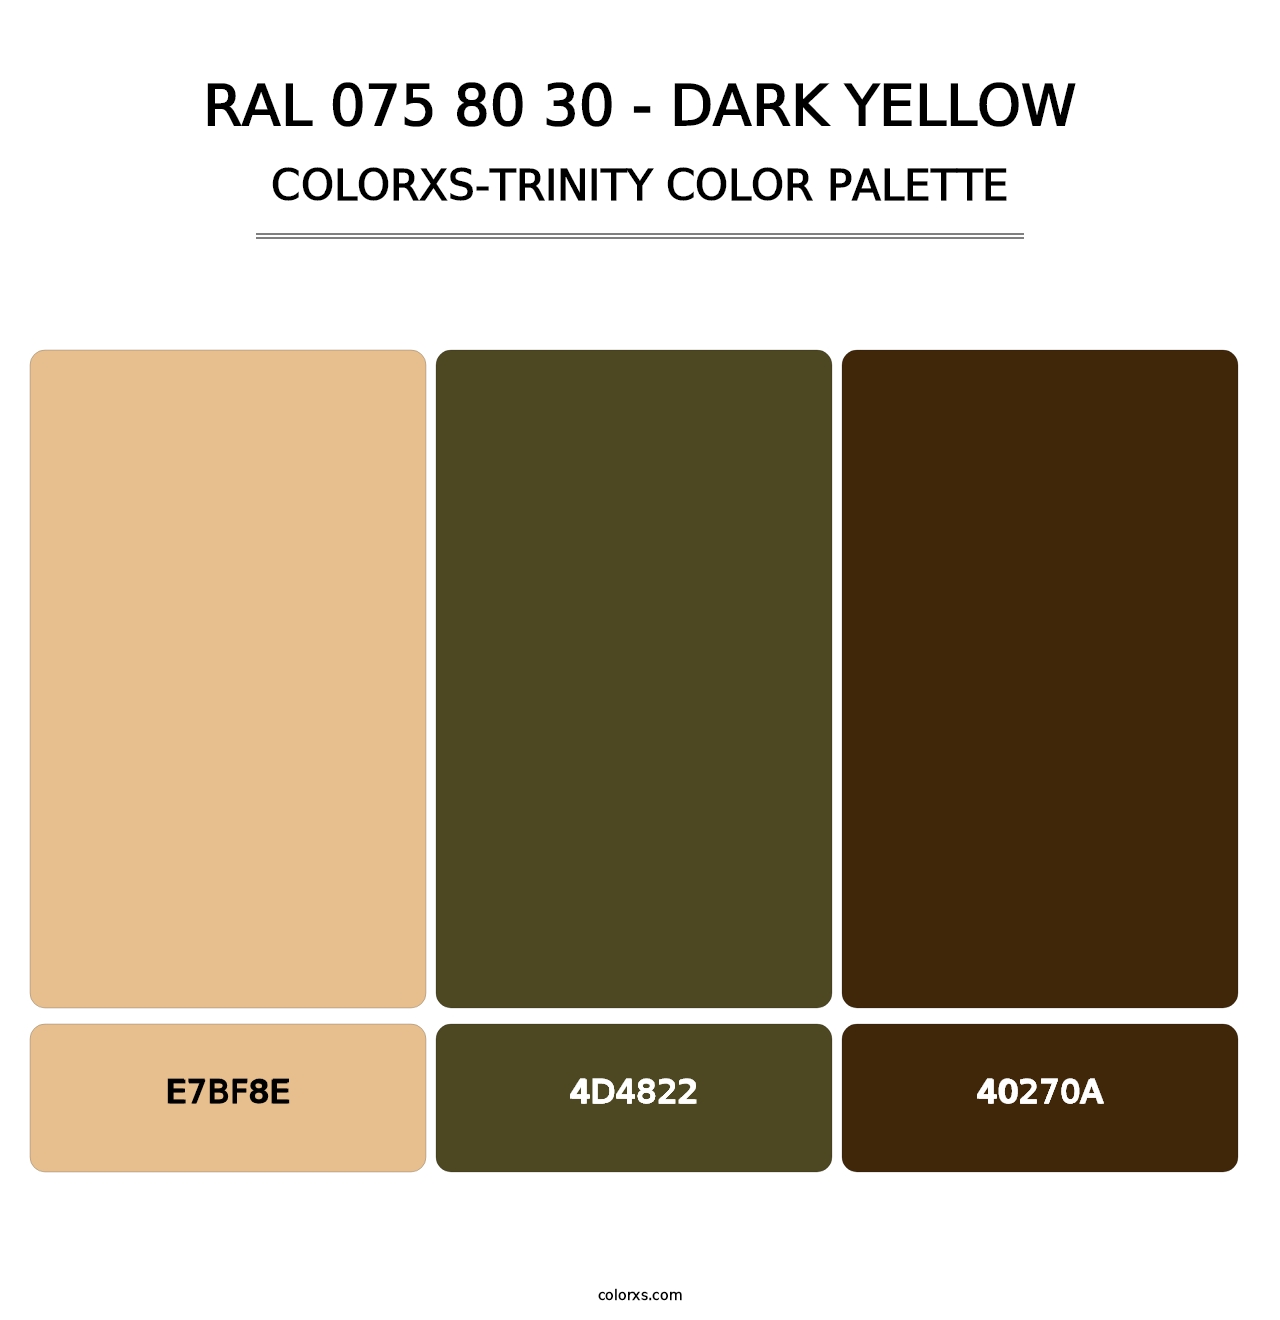 RAL 075 80 30 - Dark Yellow - Colorxs Trinity Palette